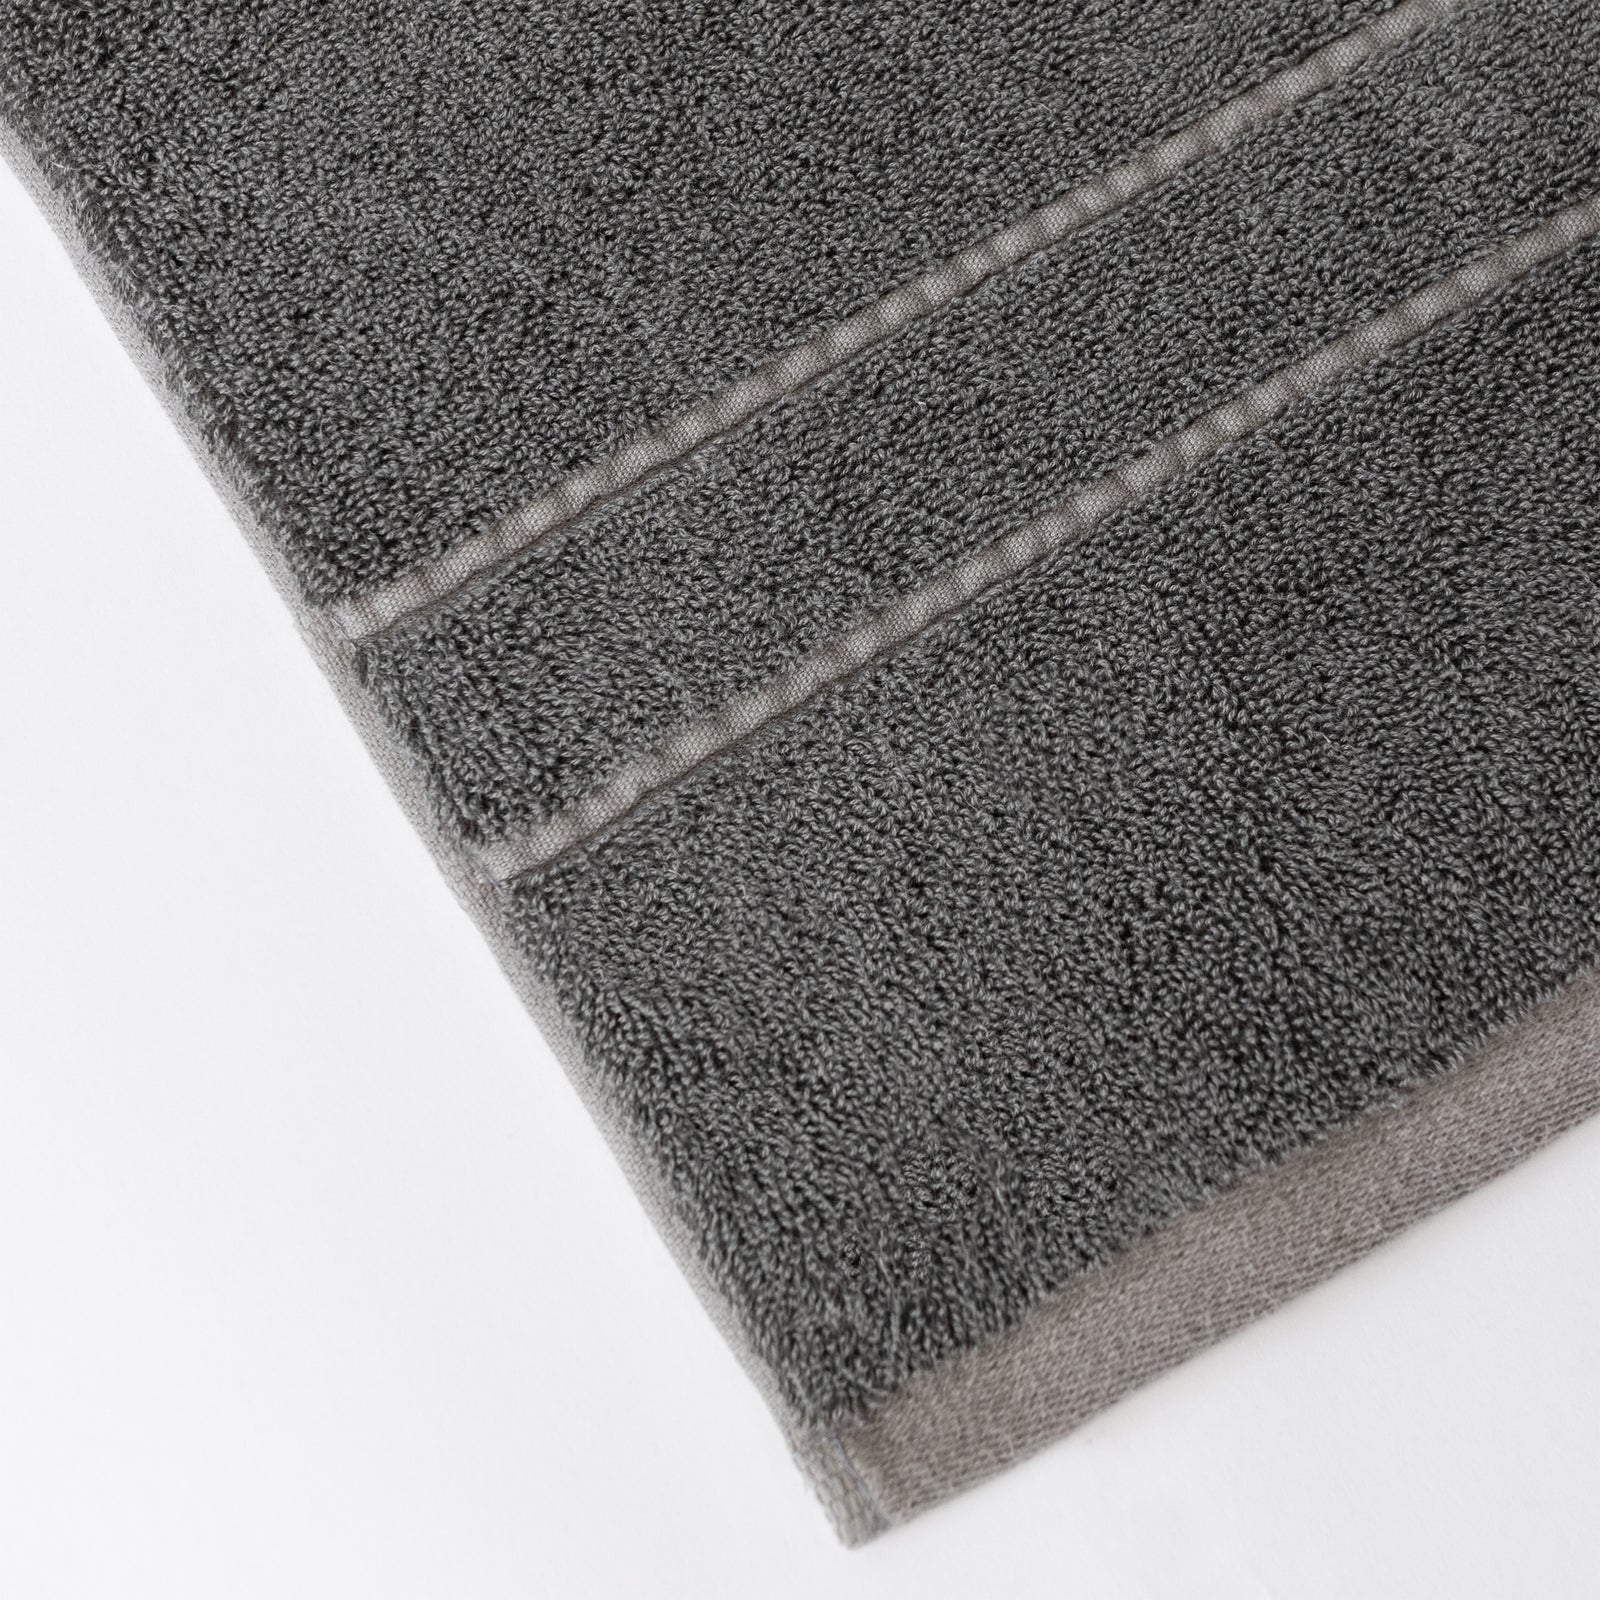 Premium Plush Bath Towels in the color Charcoal. Photo of Premium Plush Bath Towels taken on a white background showing only the corner of the towel. 